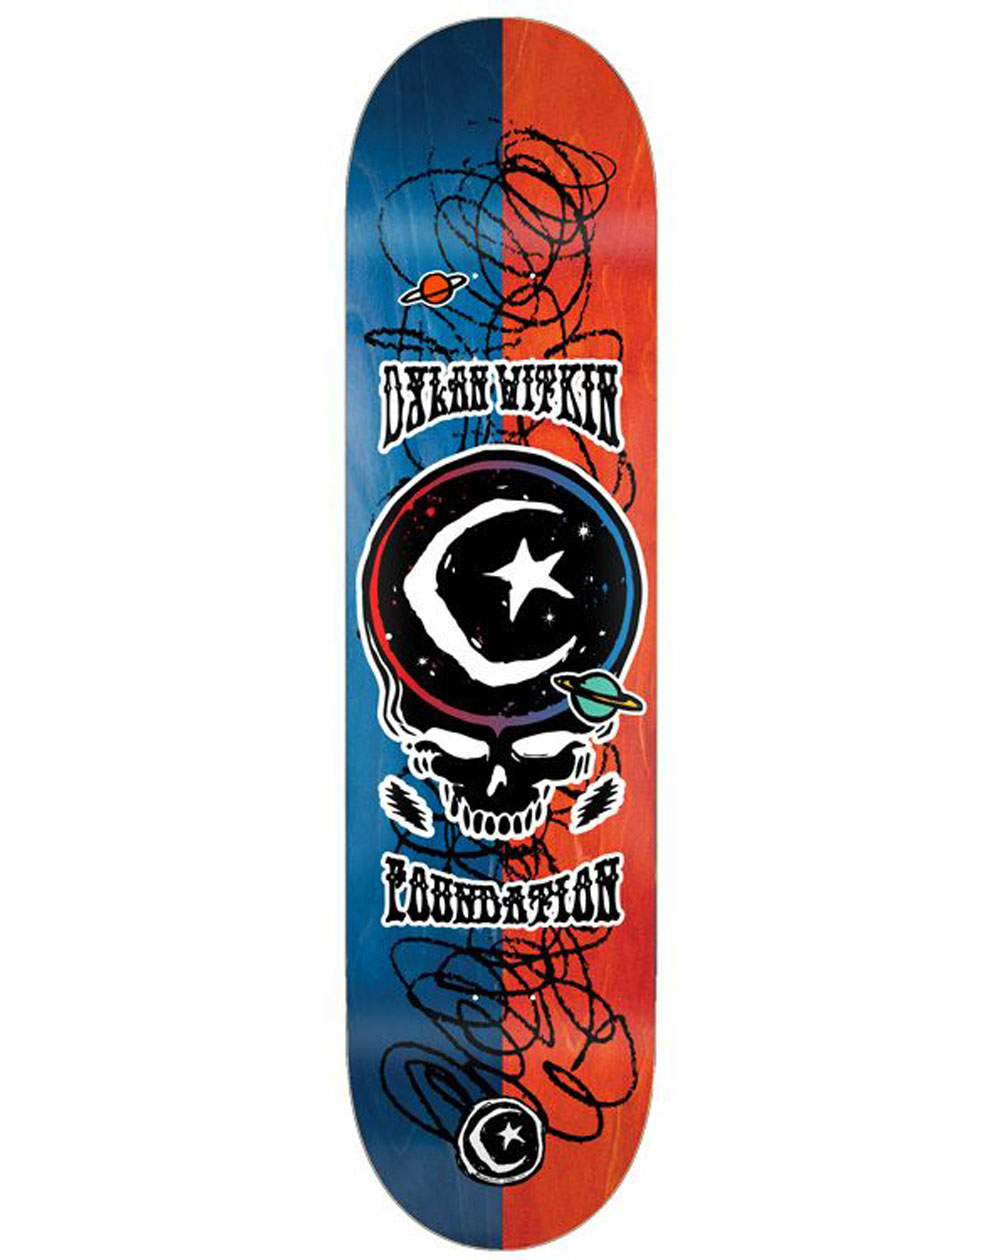 Foundation Planche de Skate Witkin Cosmic Voyage 8.5"